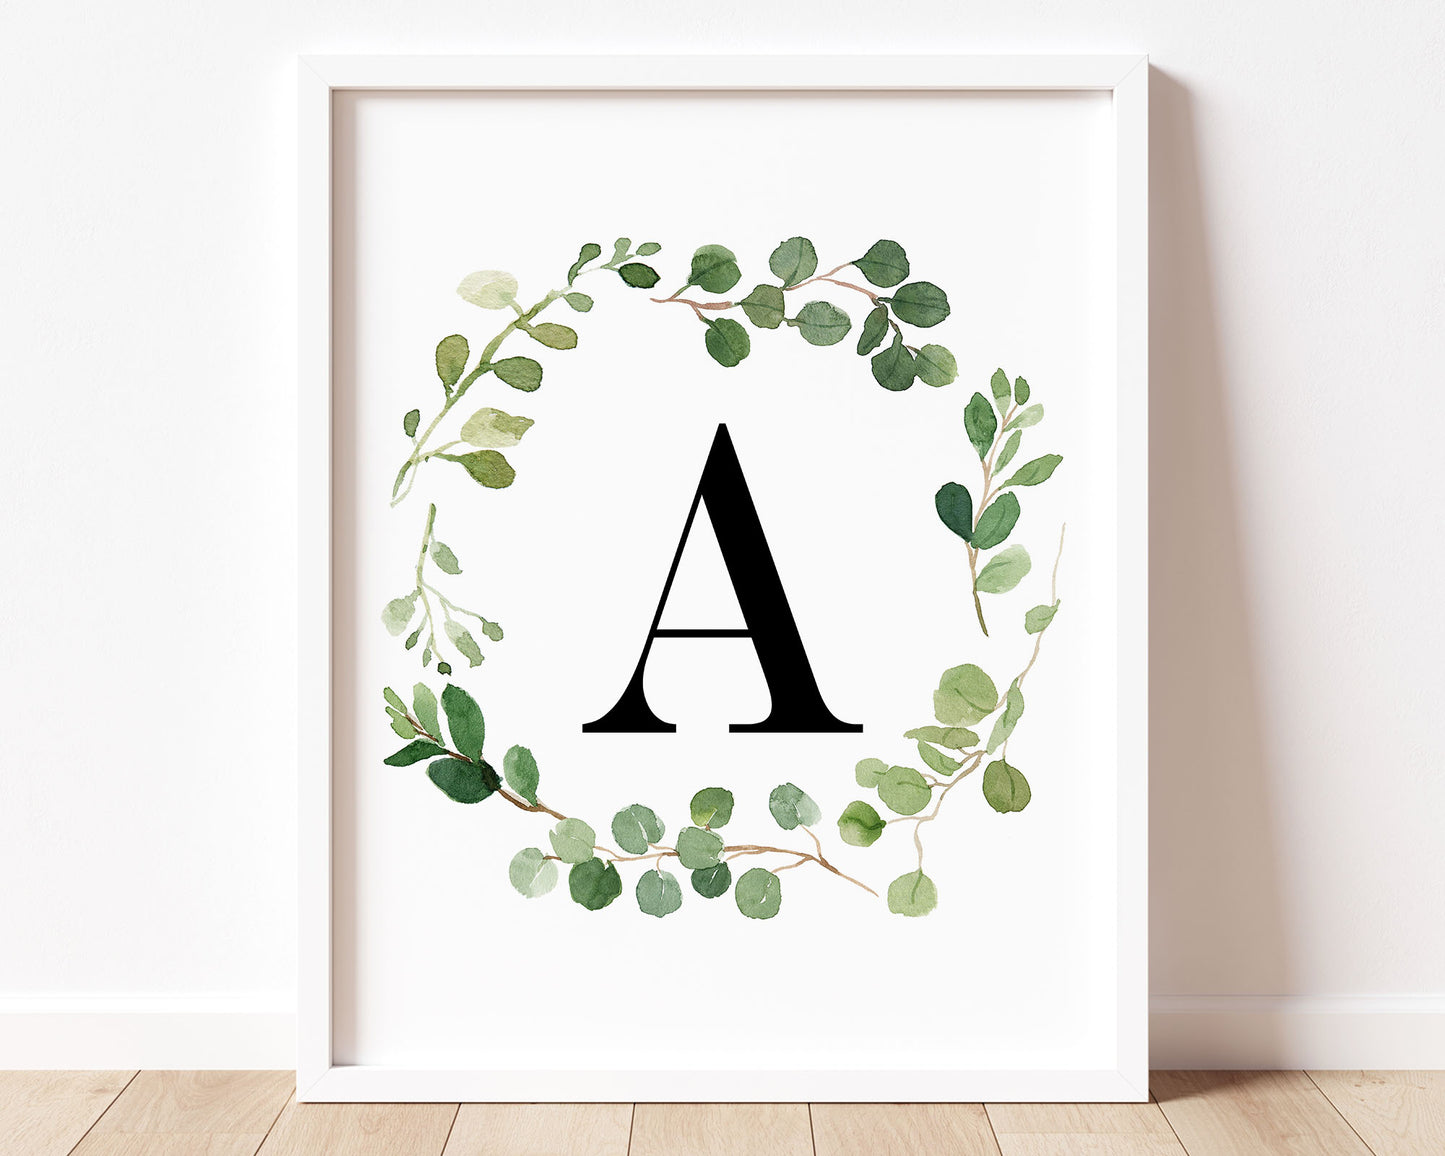 Greenery Letter A Printable Wall Art, Digital Download